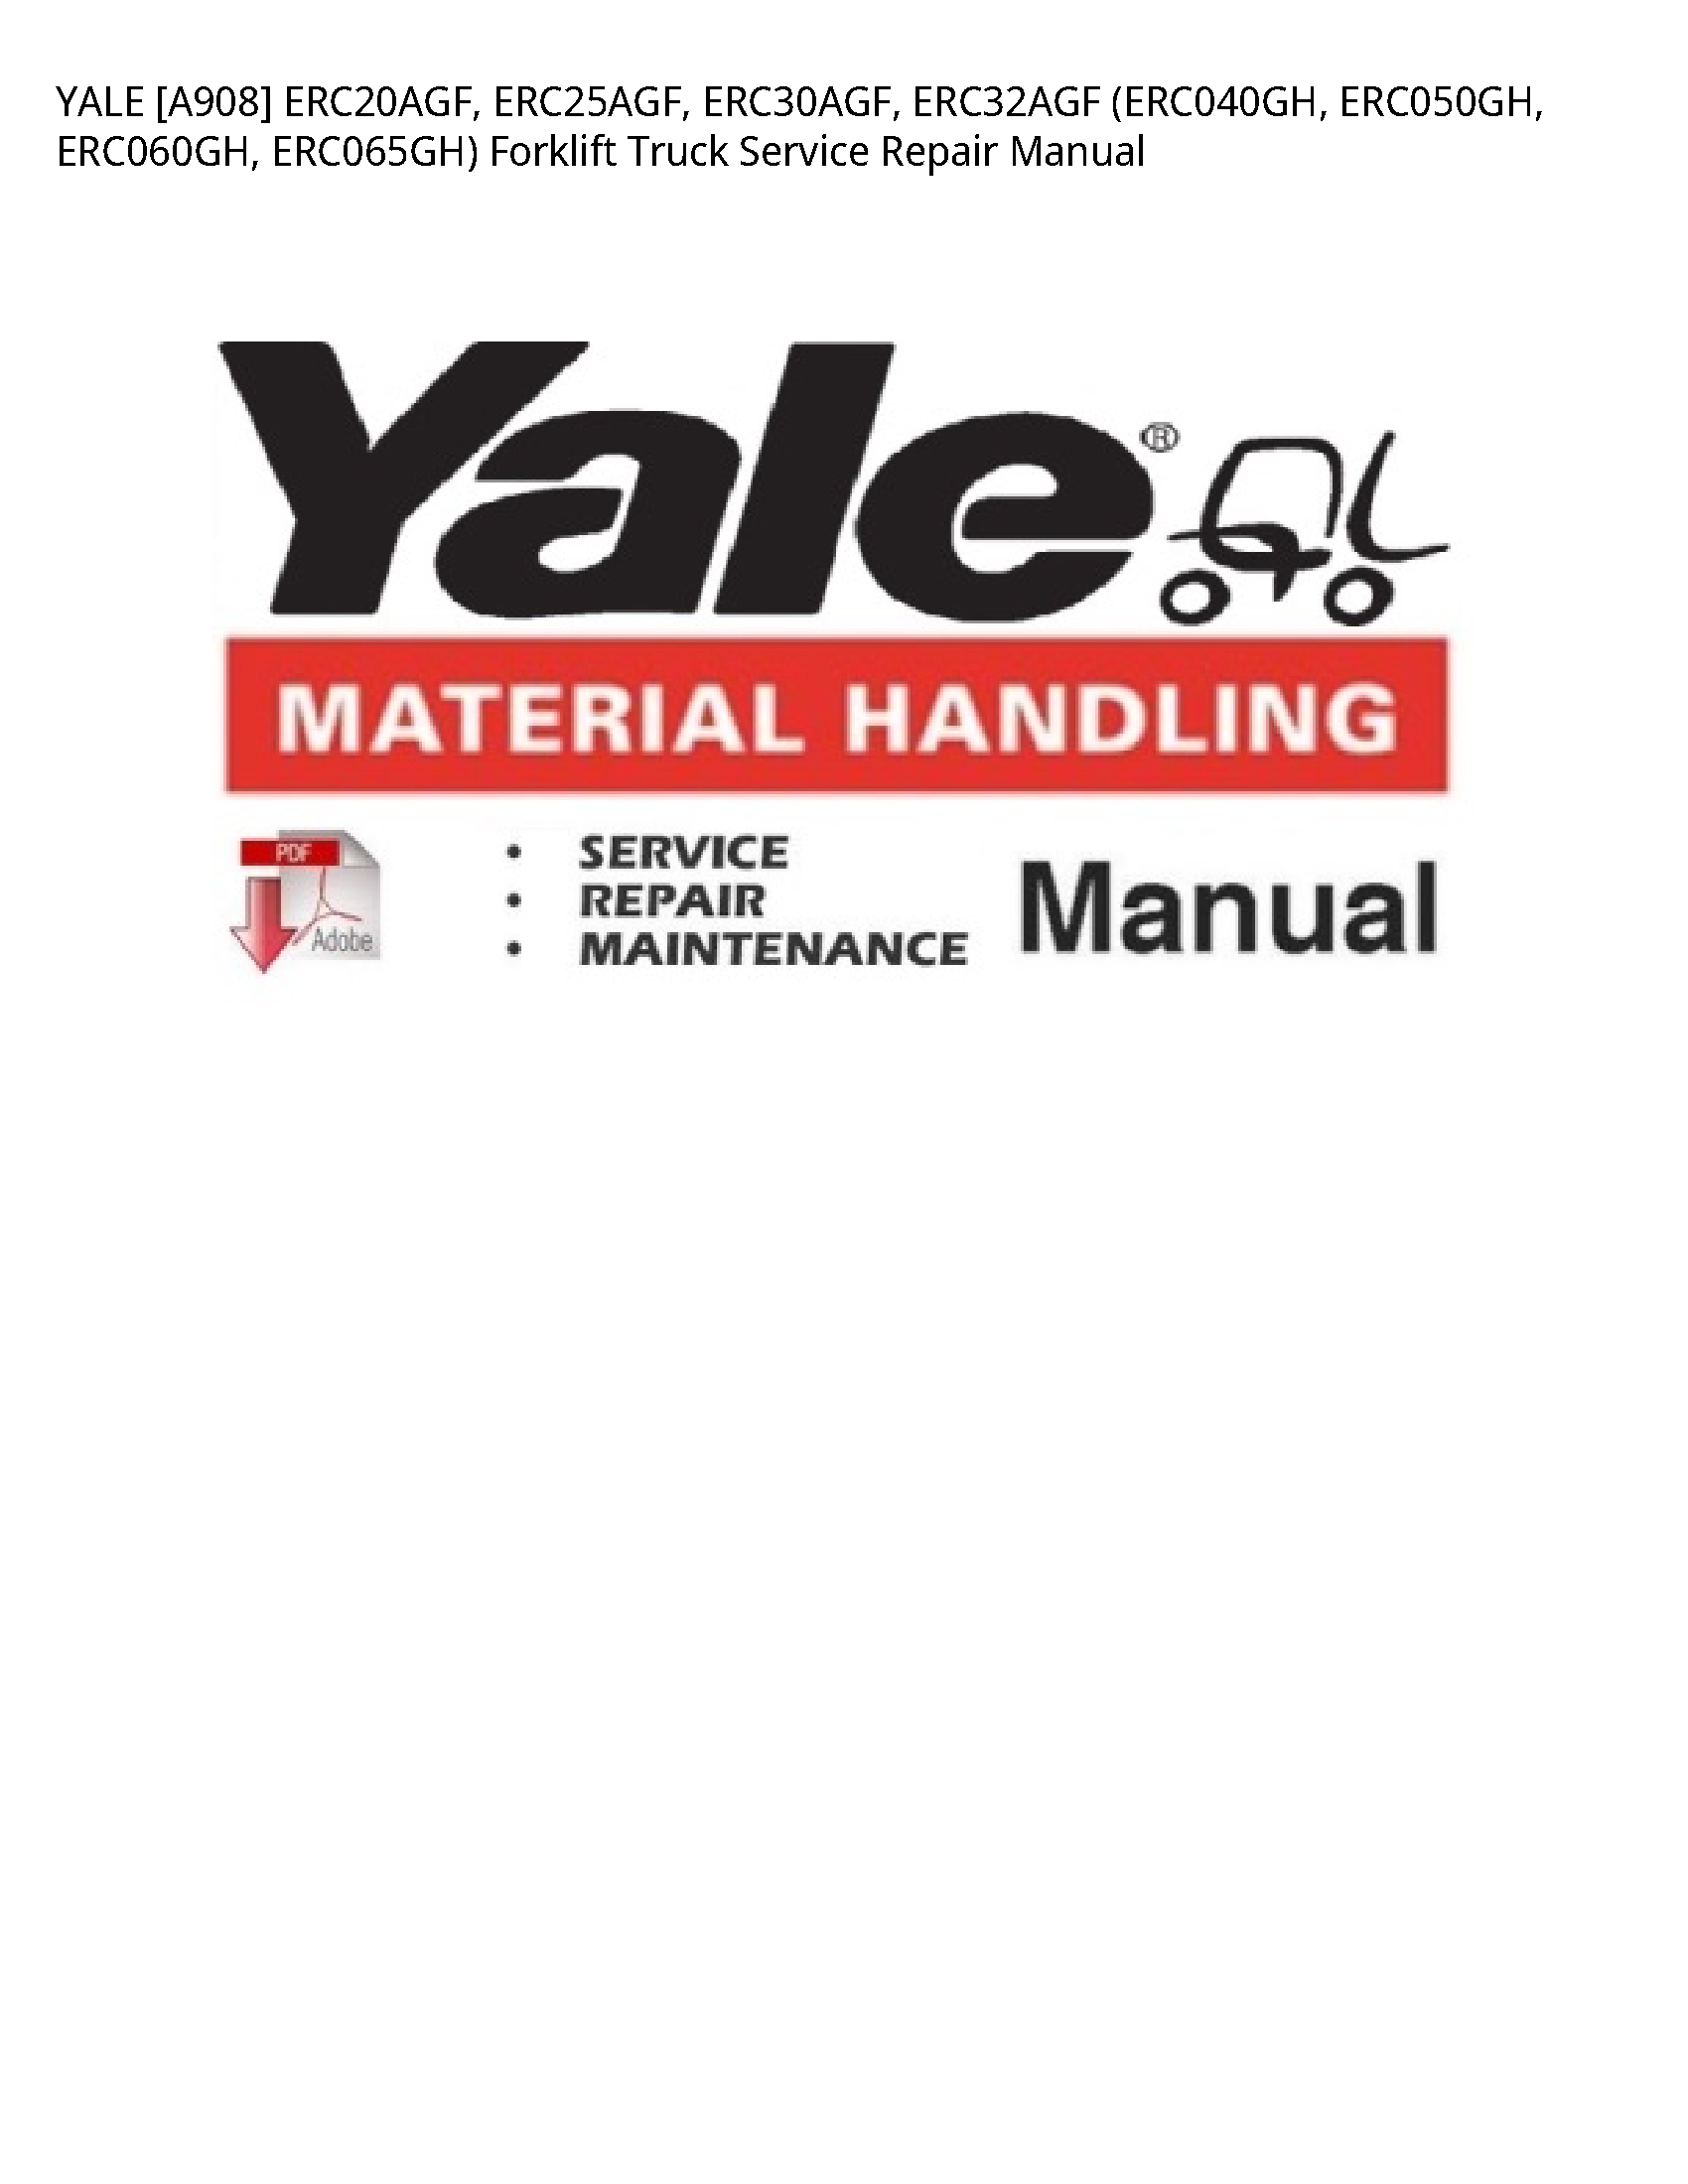 Yale [A908] Forklift Truck manual